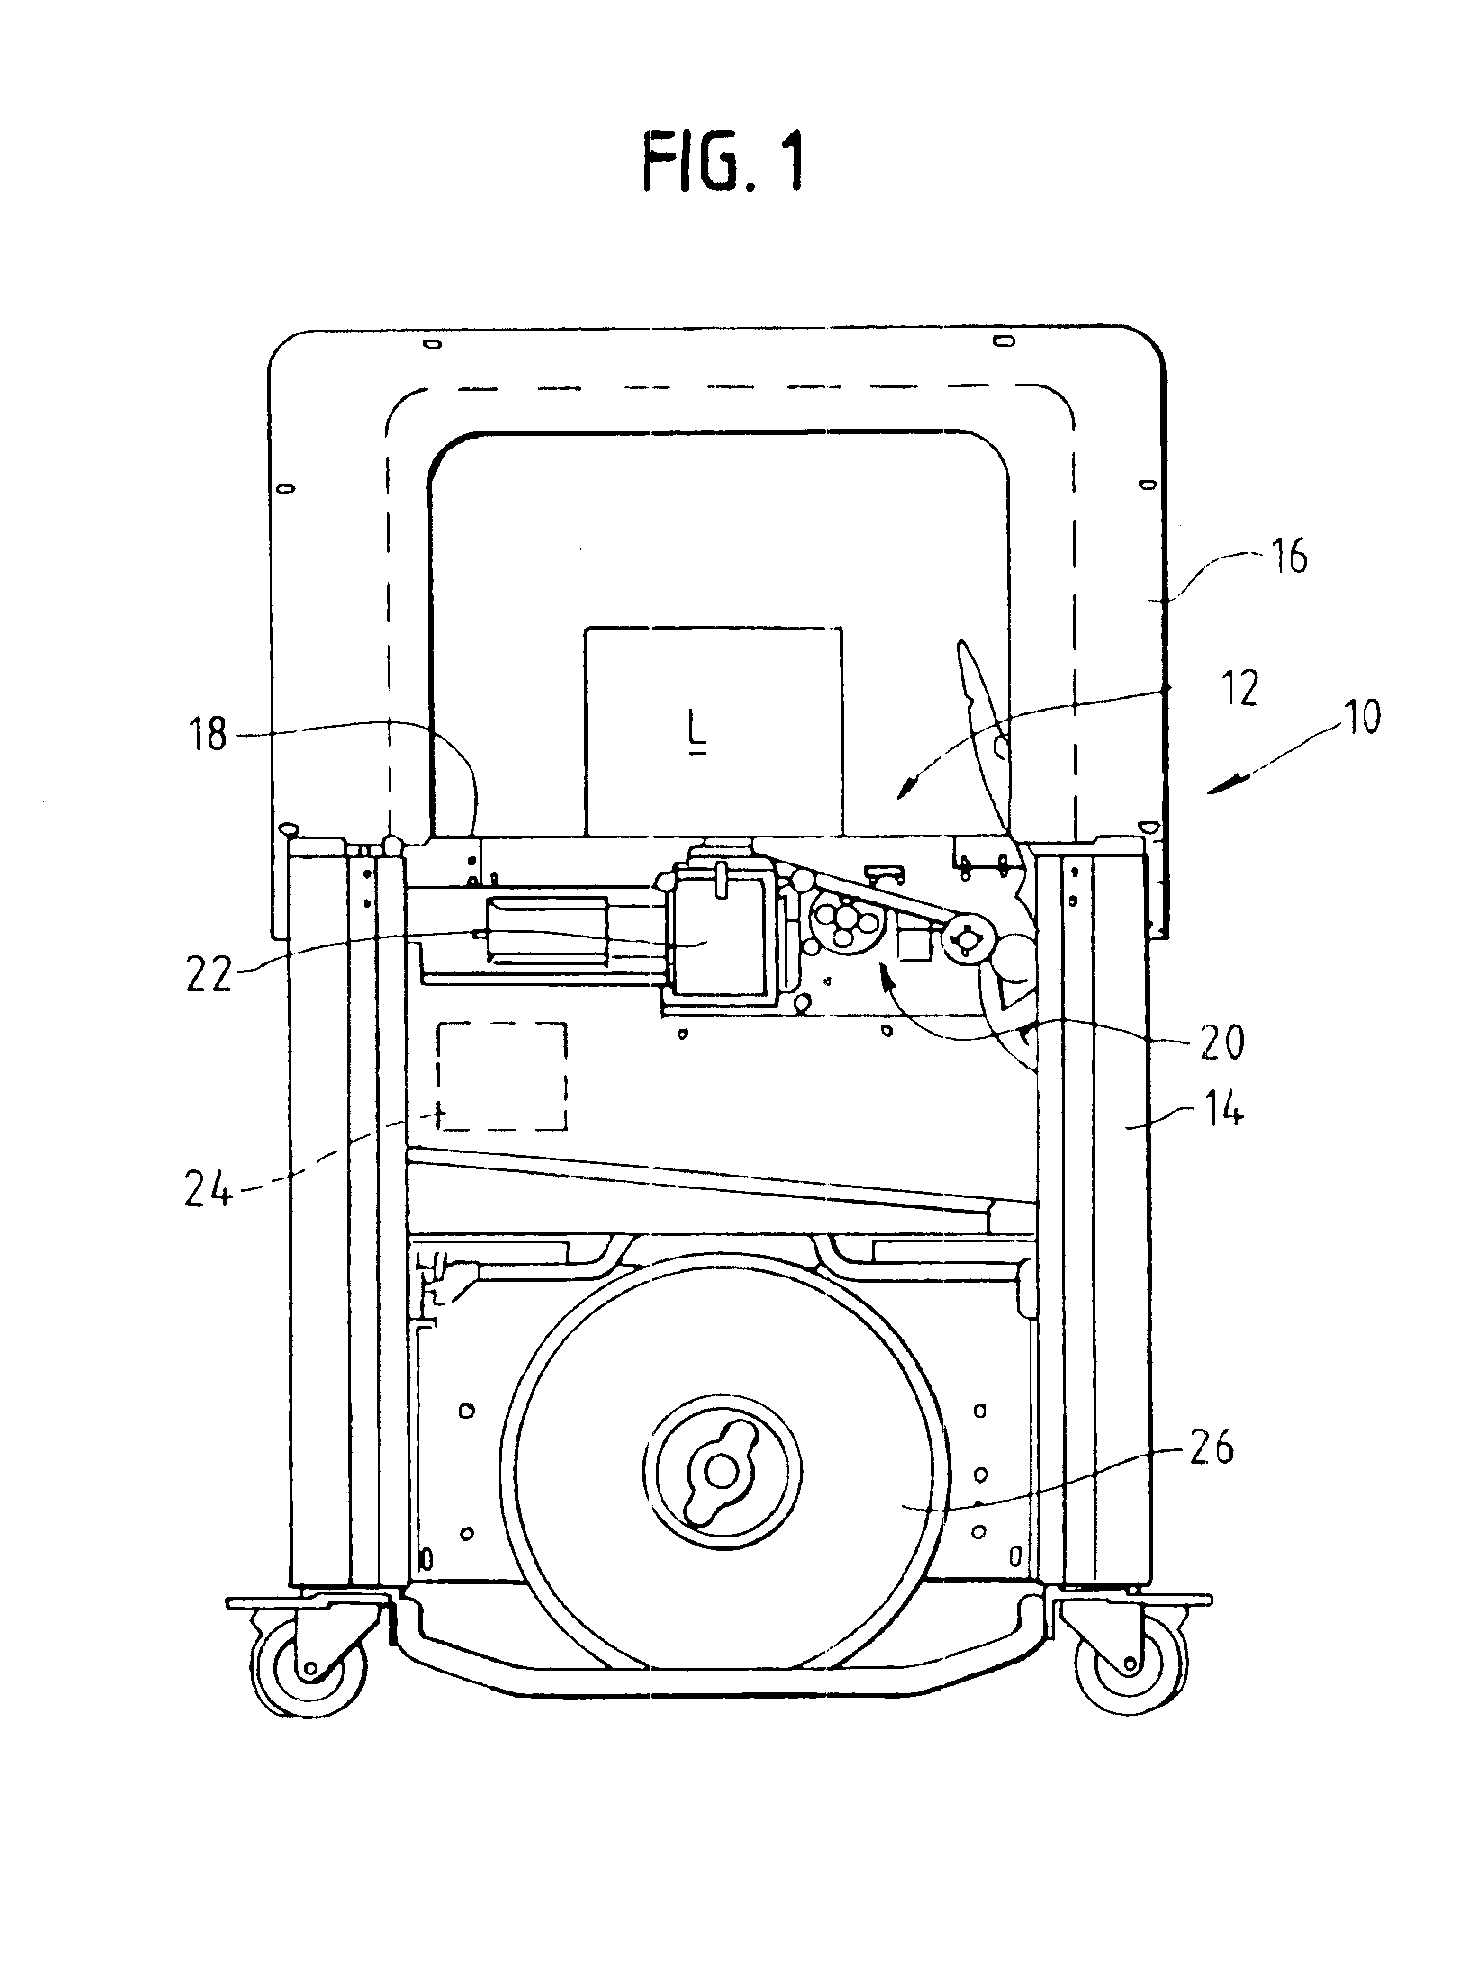 Strapping machine with strap path access guide